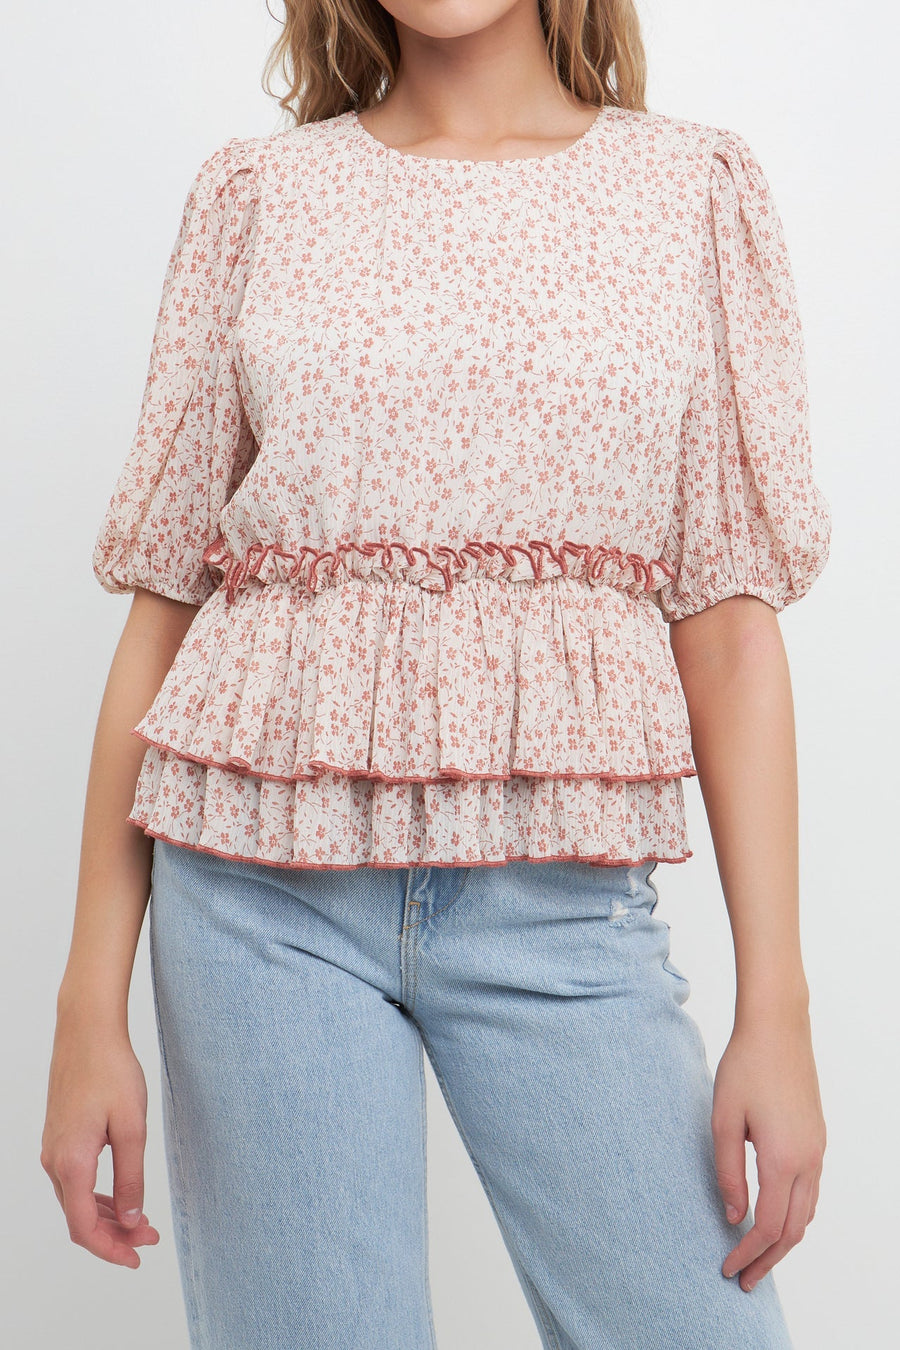 FREE THE ROSES-Pleated Floral Top-TOPS available at Objectrare